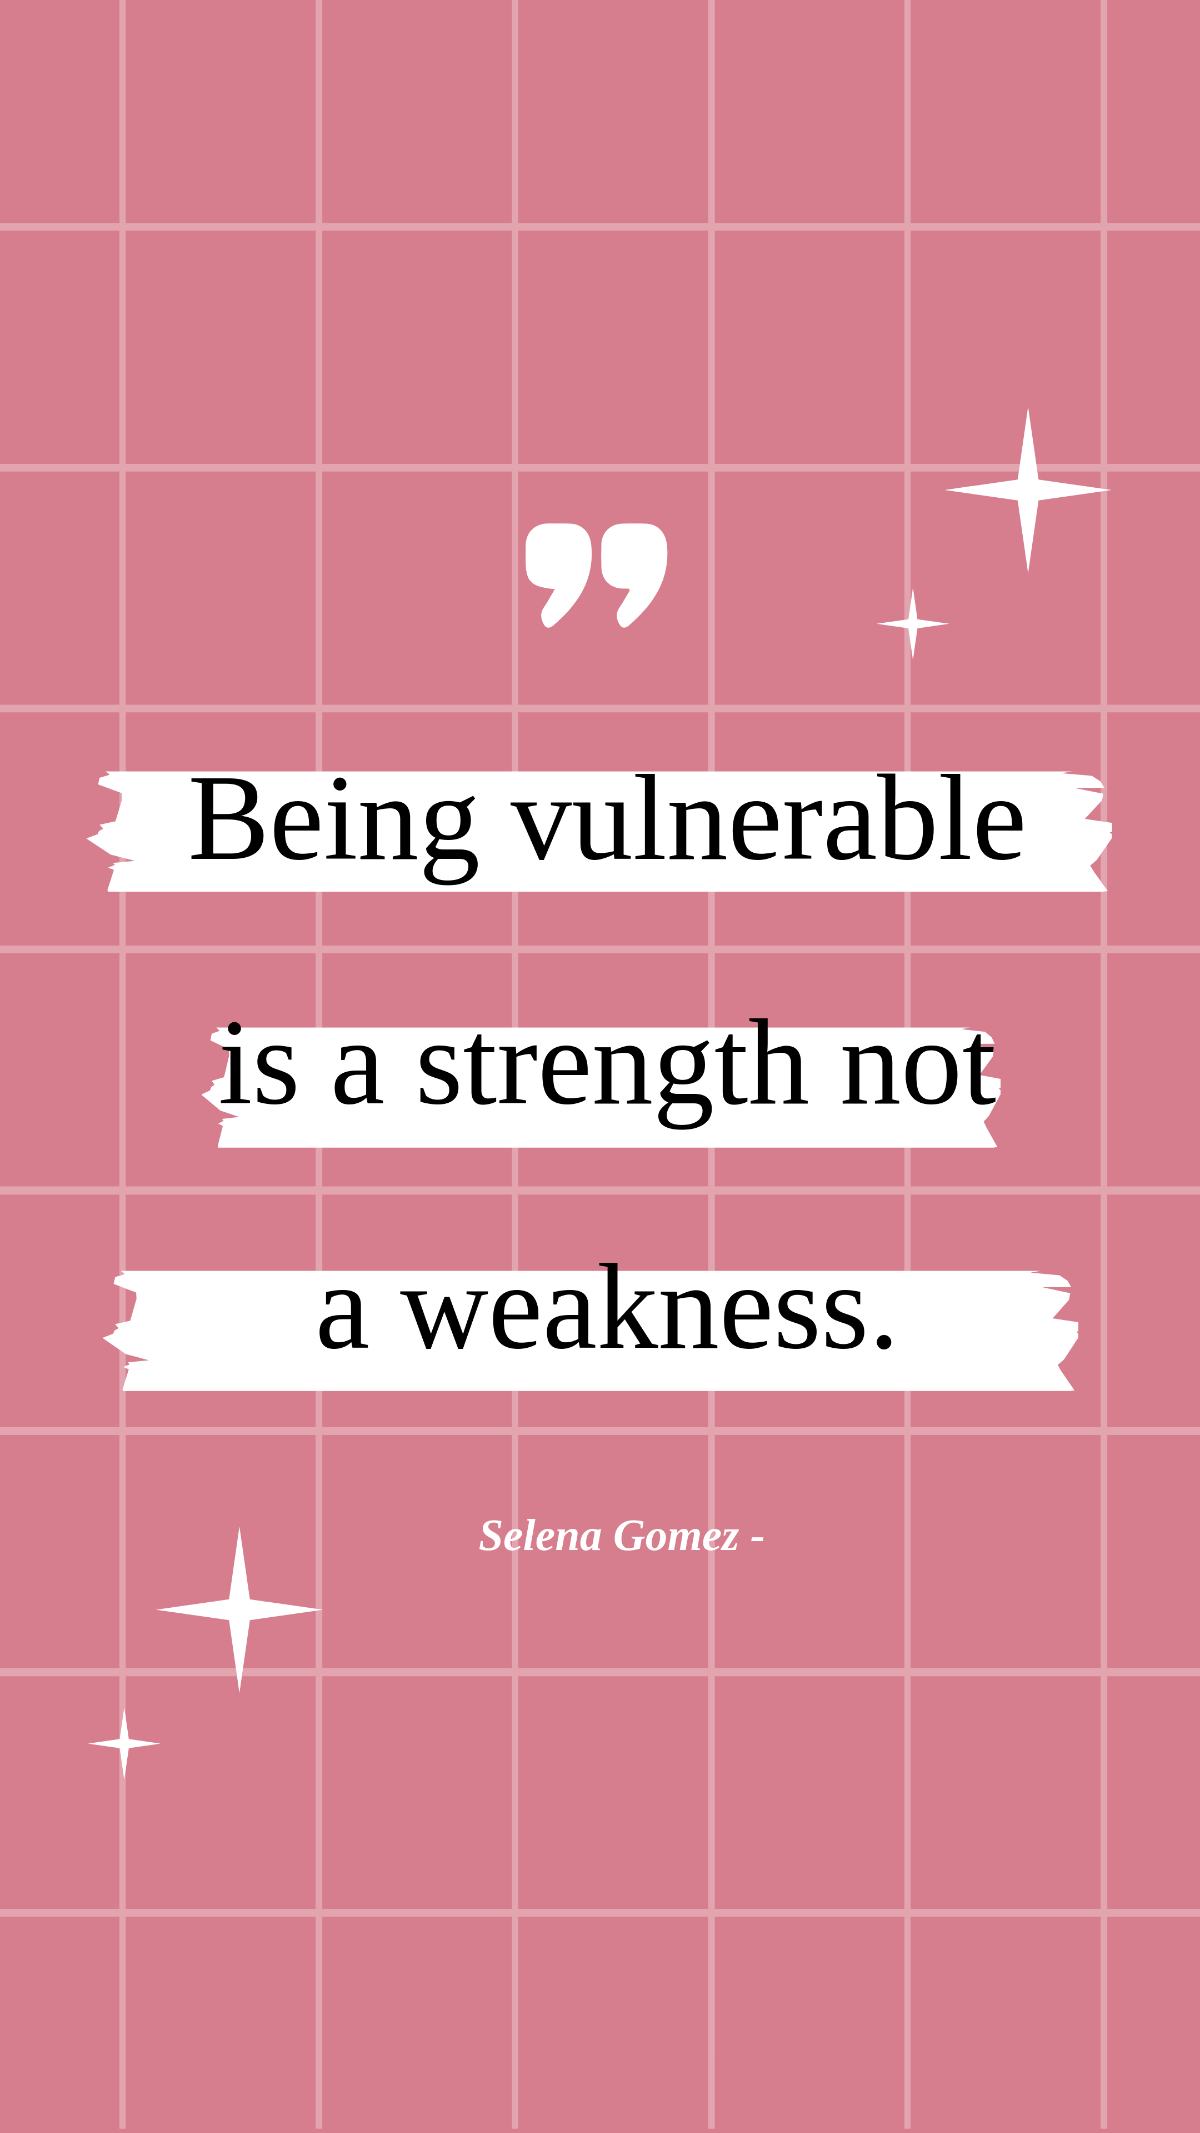 Selena Gomez - Being vulnerable is a strength not a weakness. Template